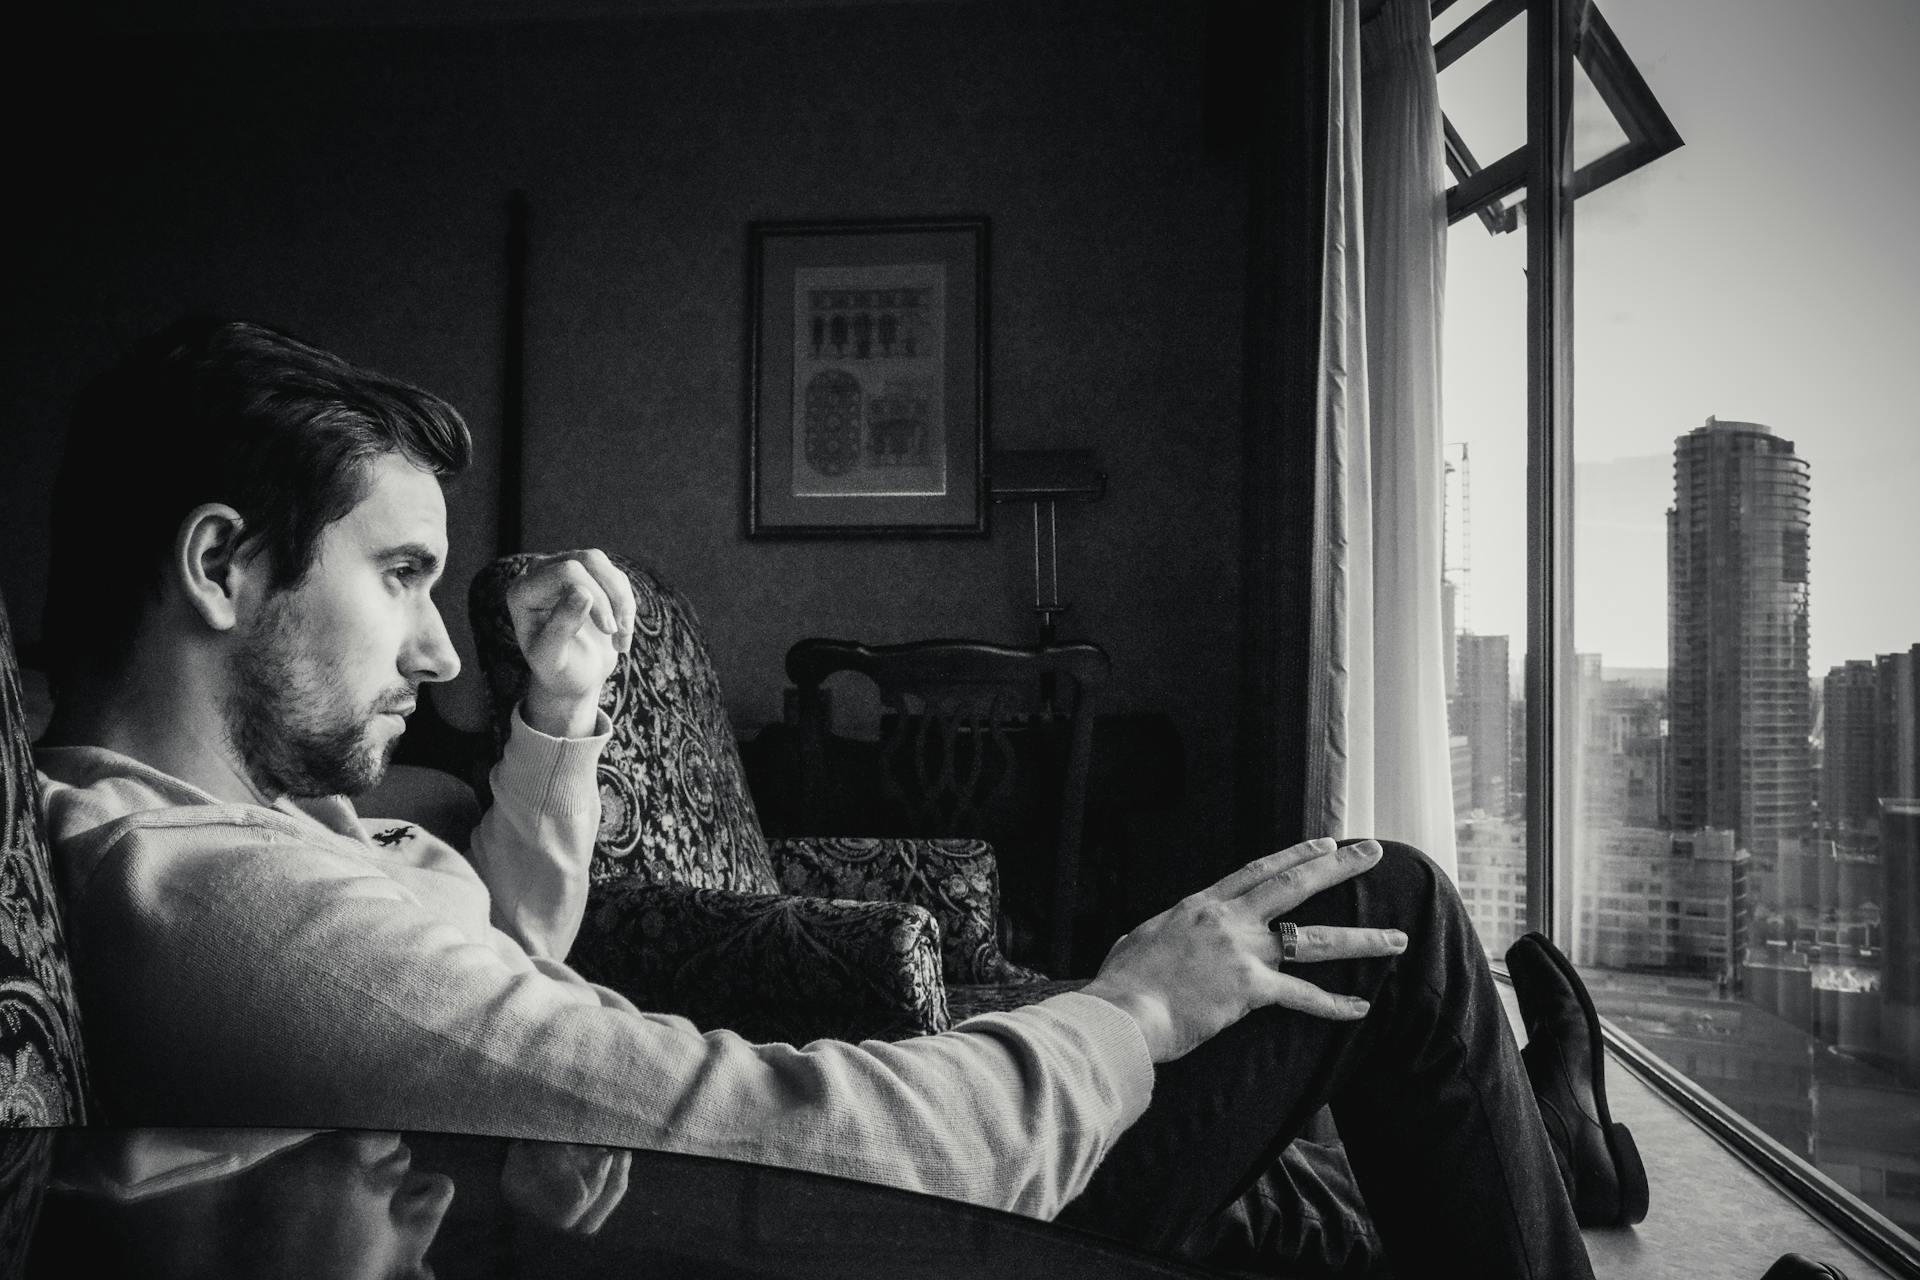 A grayscale photo of a man looking at the window | Source: Pexels